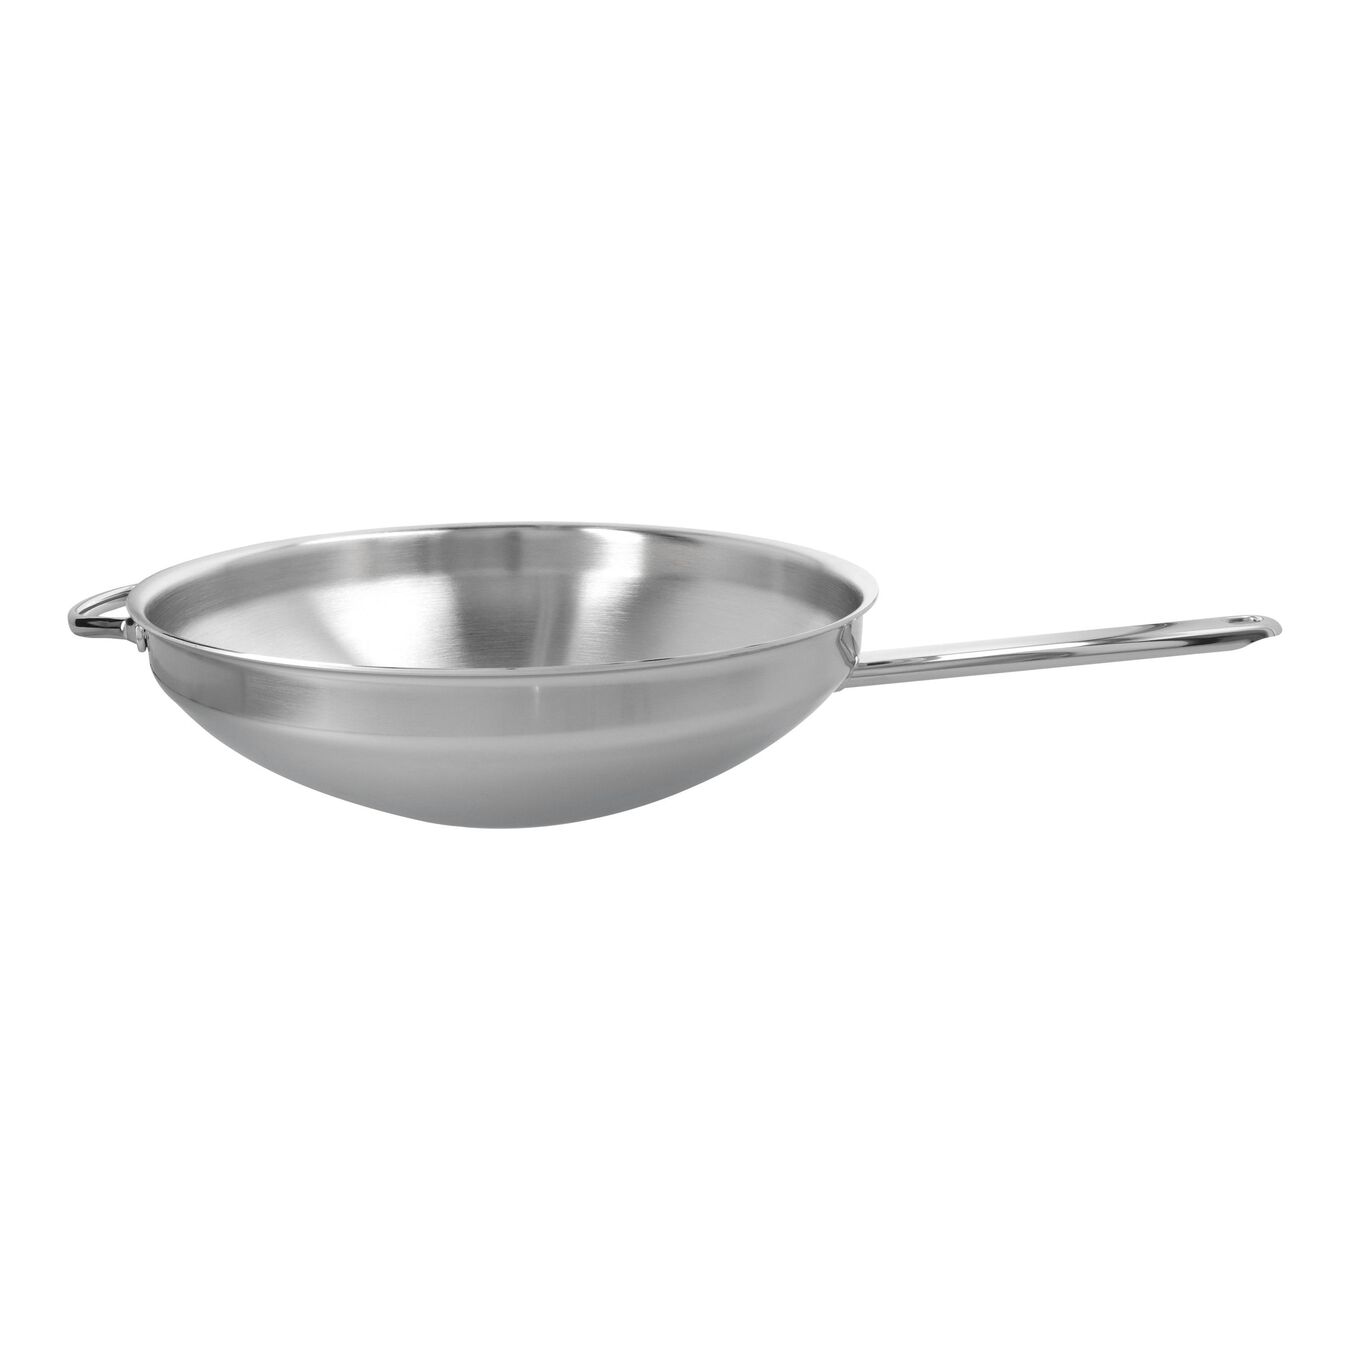 12.5-inch, 18/10 Stainless Steel, Flat Bottom Wok with Helper Handle, silver,,large 1